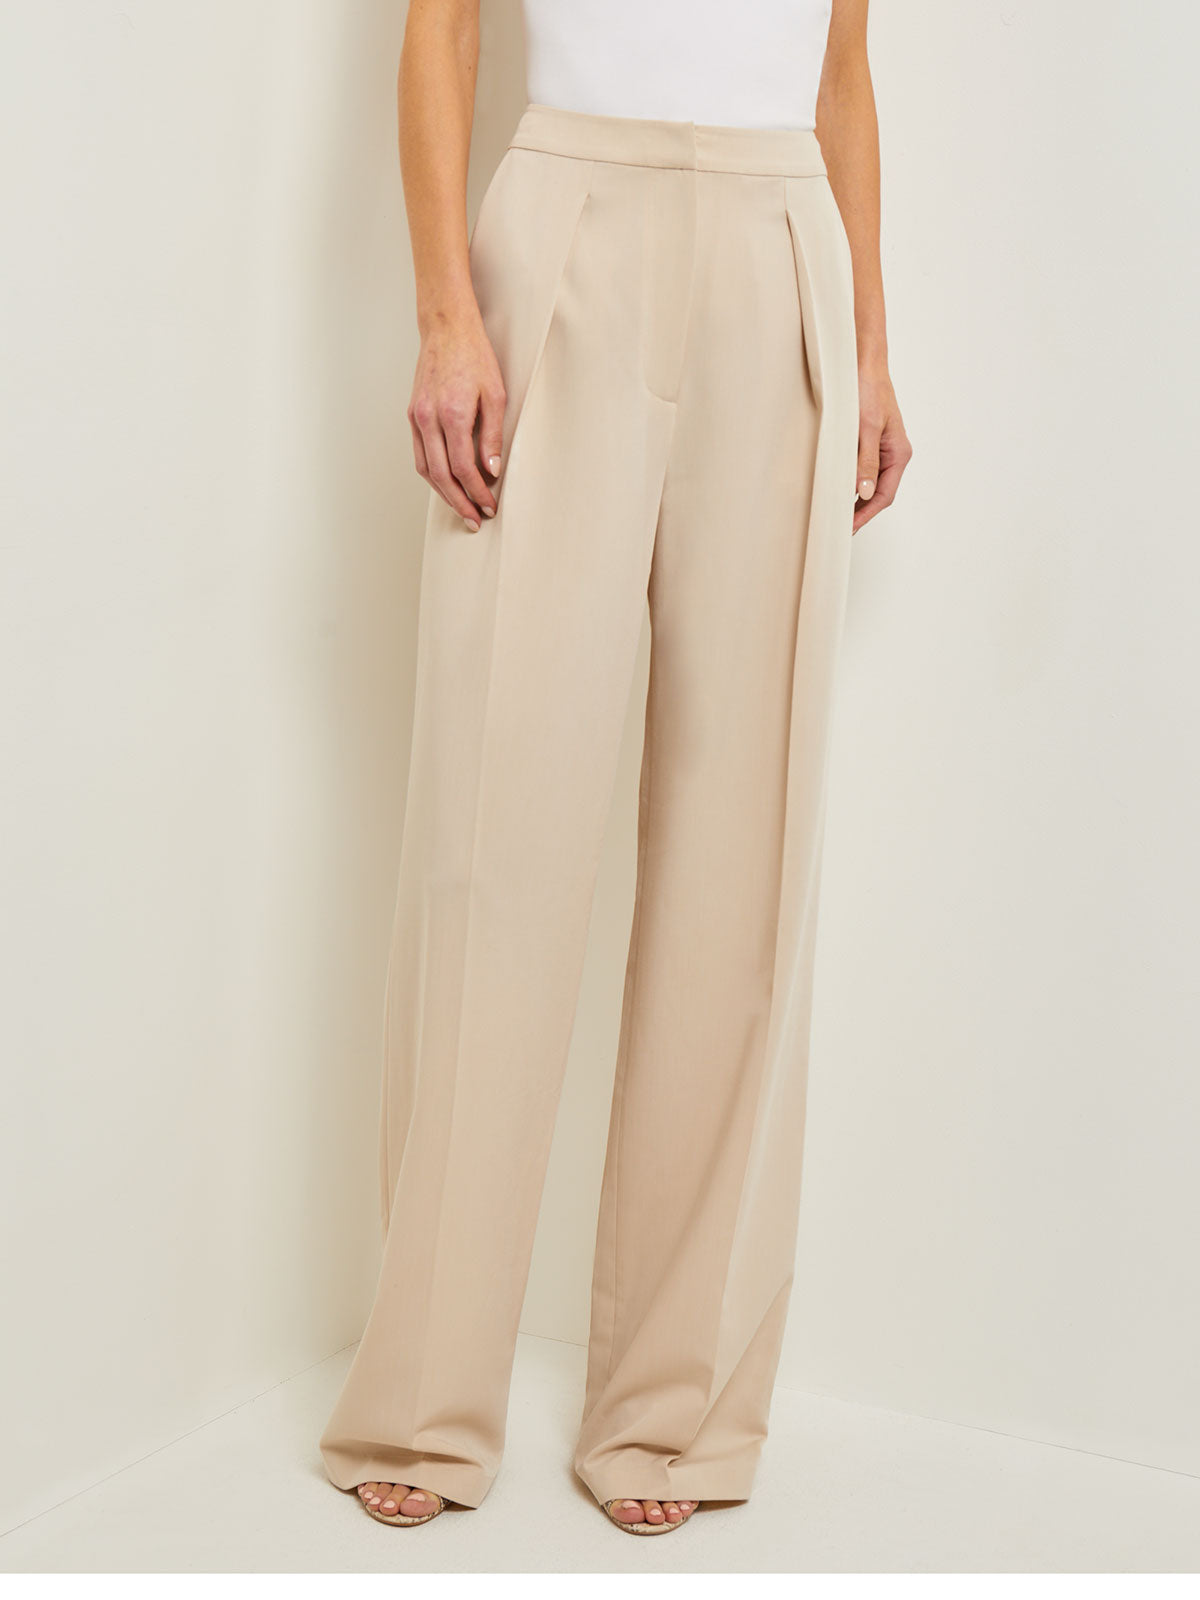 High-Waisted Wide-Leg Ponte-Knit Pants for Women